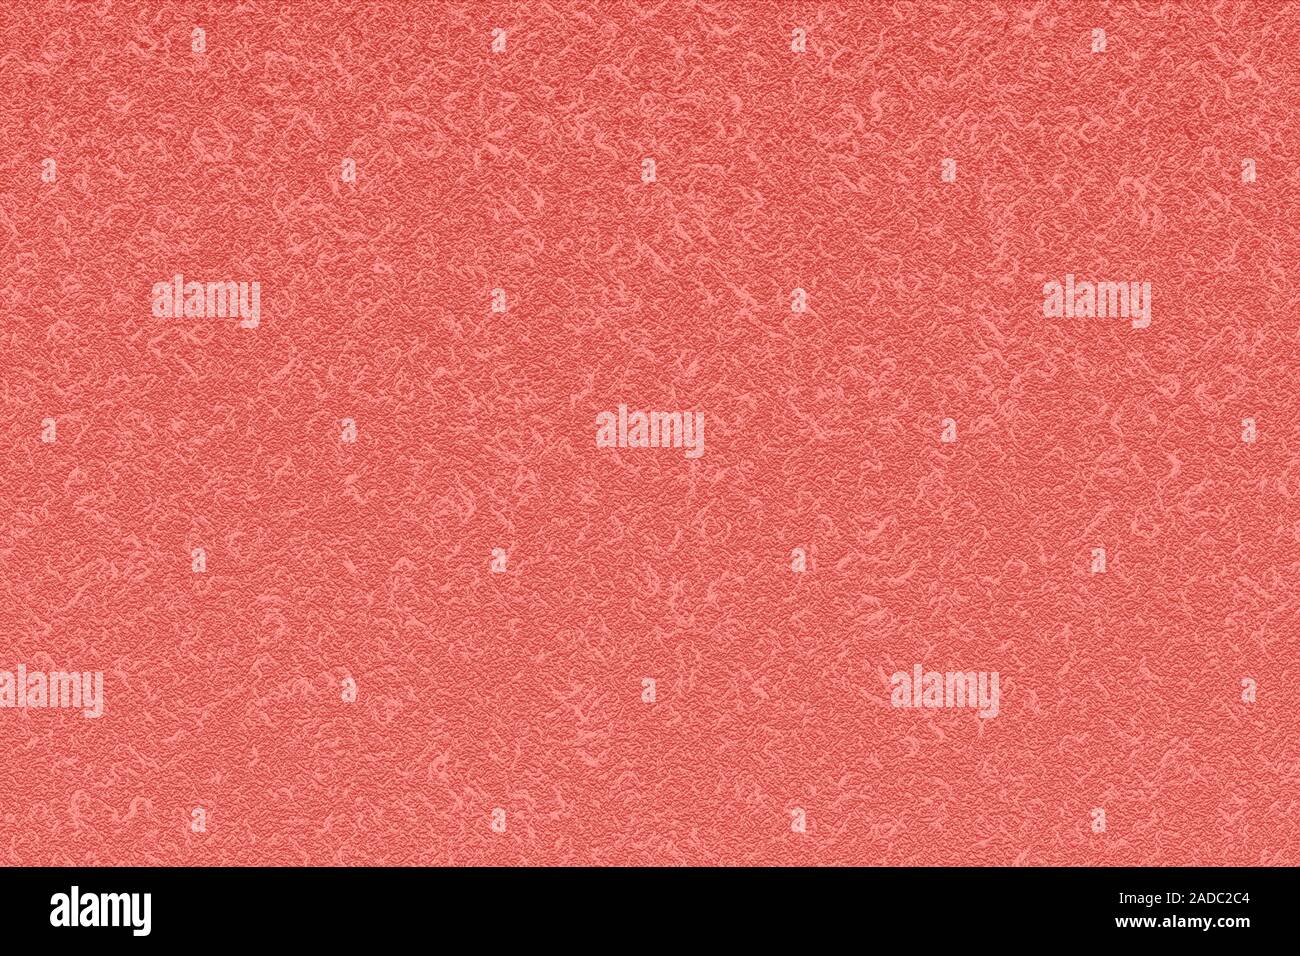 Abstract texture. Coral swirls background. Pattern for decor, fashion design Stock Photo